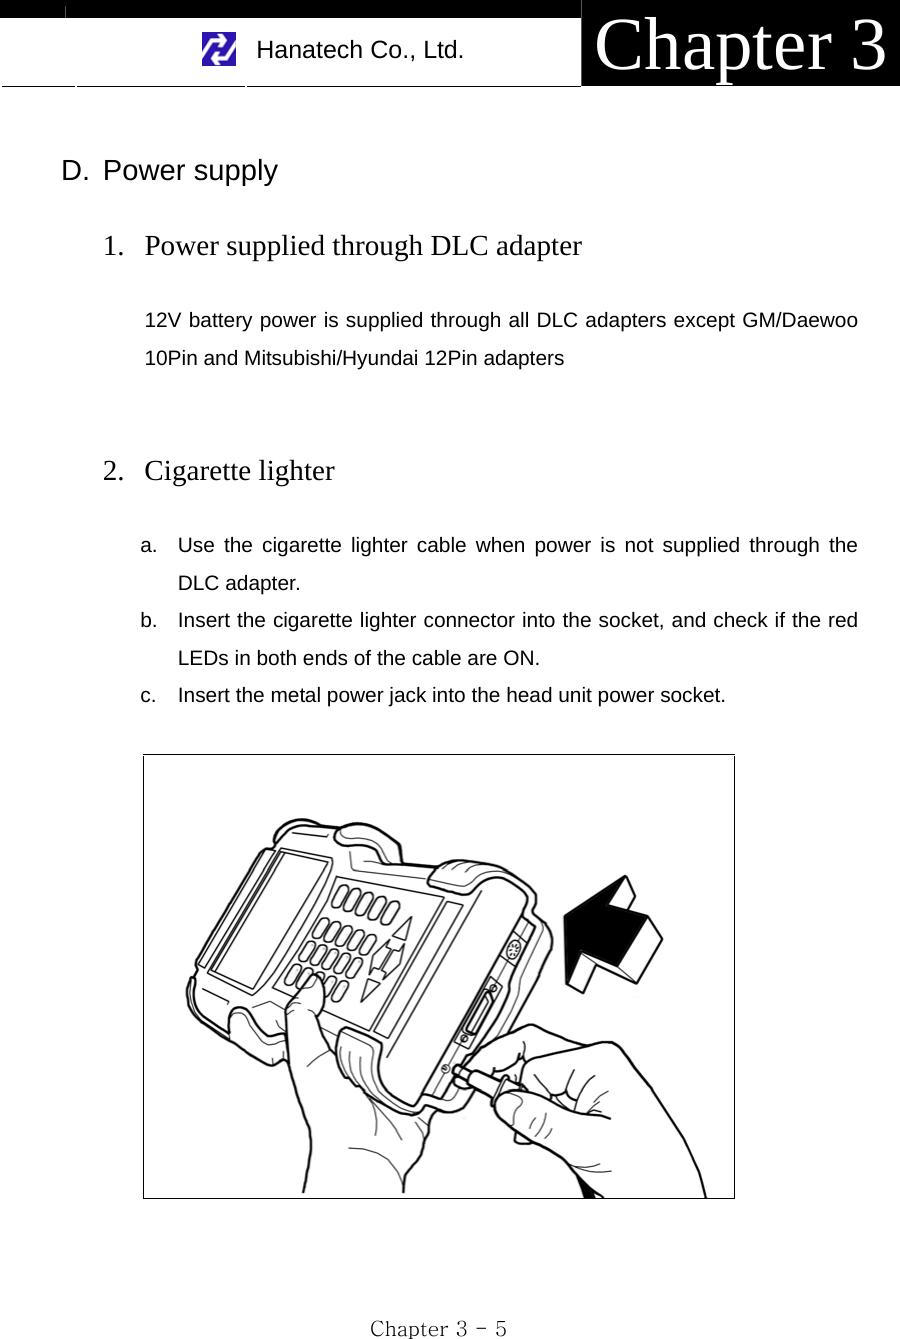     Hanatech Co., Ltd.  Chapter 3 Chapter 3 - 5  D. Power supply  1. Power supplied through DLC adapter  12V battery power is supplied through all DLC adapters except GM/Daewoo 10Pin and Mitsubishi/Hyundai 12Pin adapters   2. Cigarette lighter    a.  Use the cigarette lighter cable when power is not supplied through the DLC adapter.   b.  Insert the cigarette lighter connector into the socket, and check if the red LEDs in both ends of the cable are ON. c.  Insert the metal power jack into the head unit power socket.   